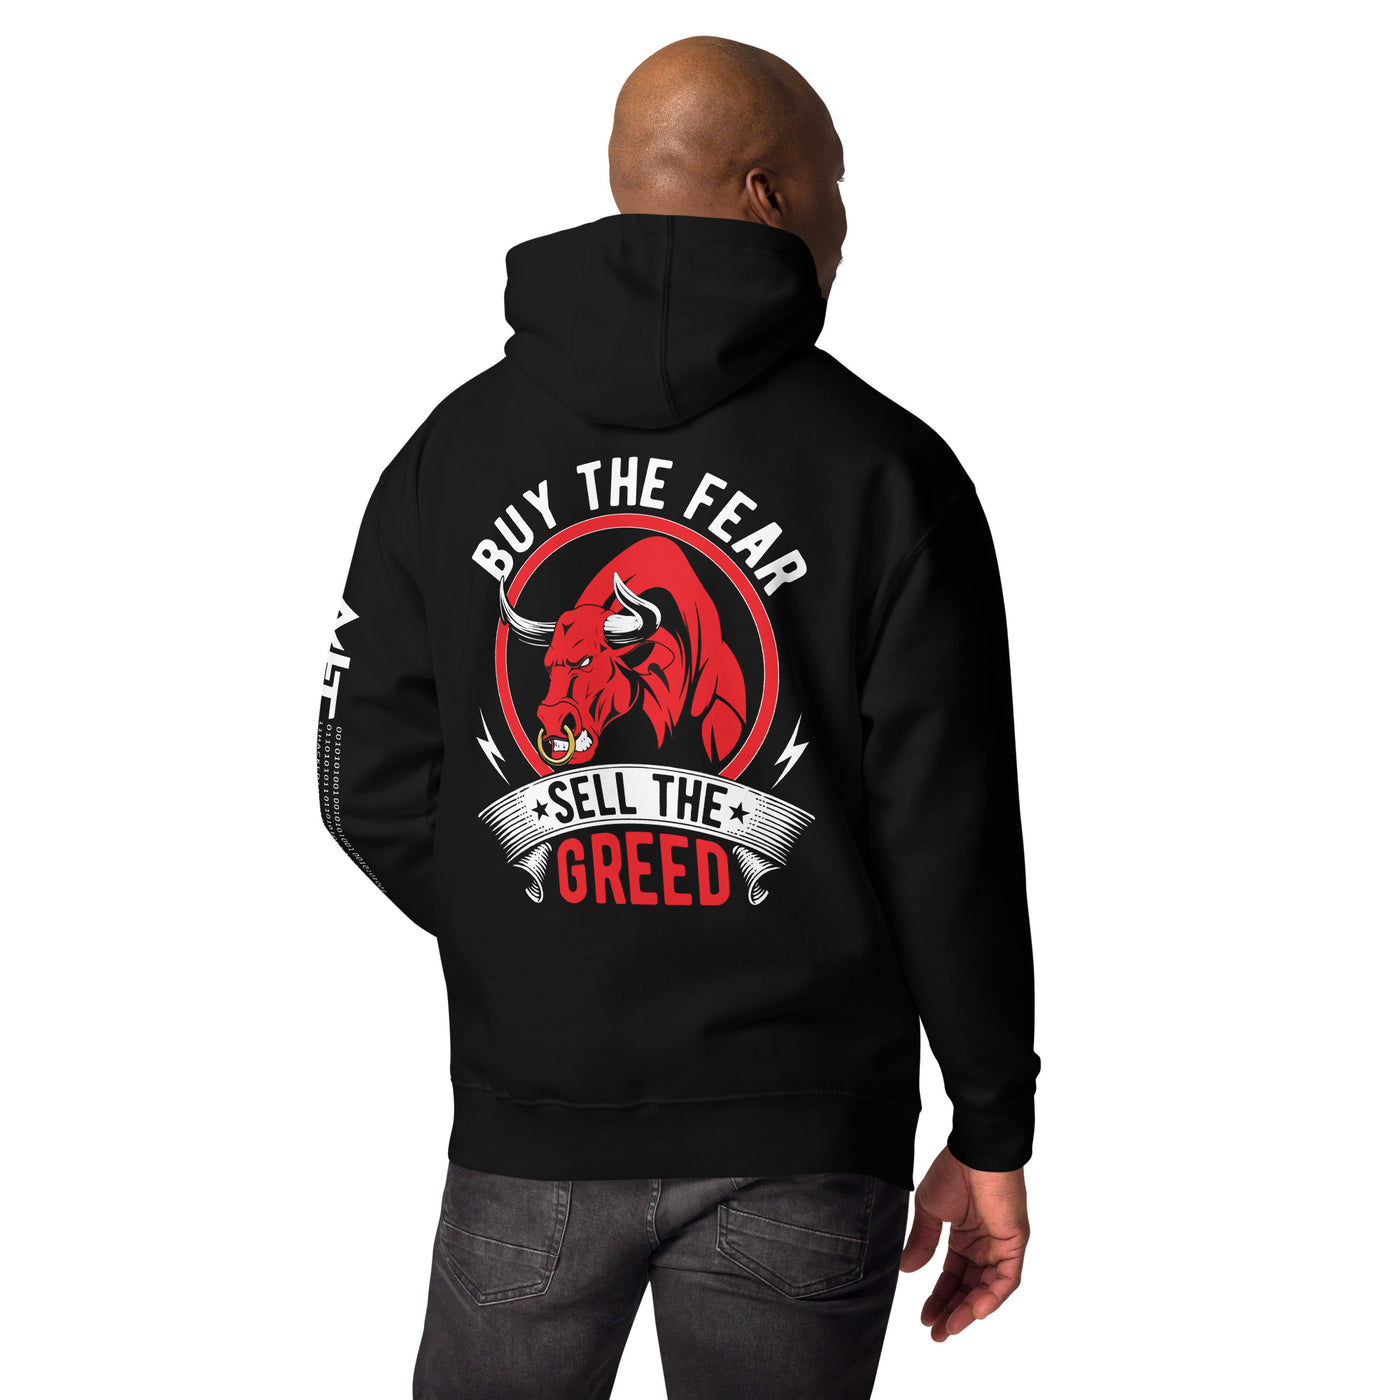 Buy the Fear; Sell the Greed - Unisex Hoodie ( Back Print )